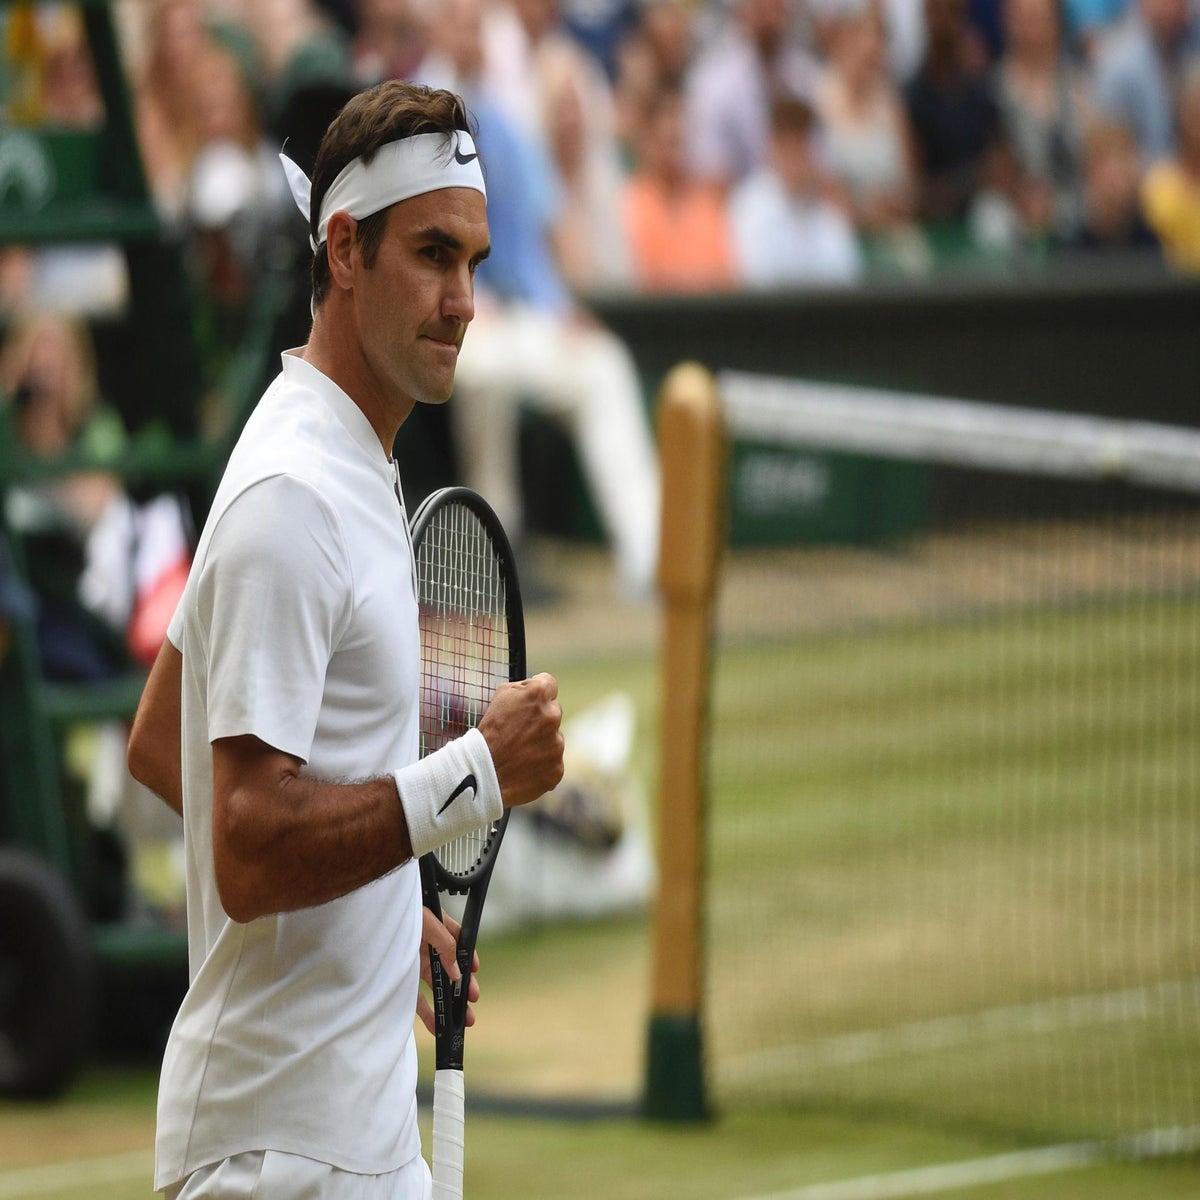 The Unexpected Challenge: Roger Federer's Wimbledon Quarterfinal Victory